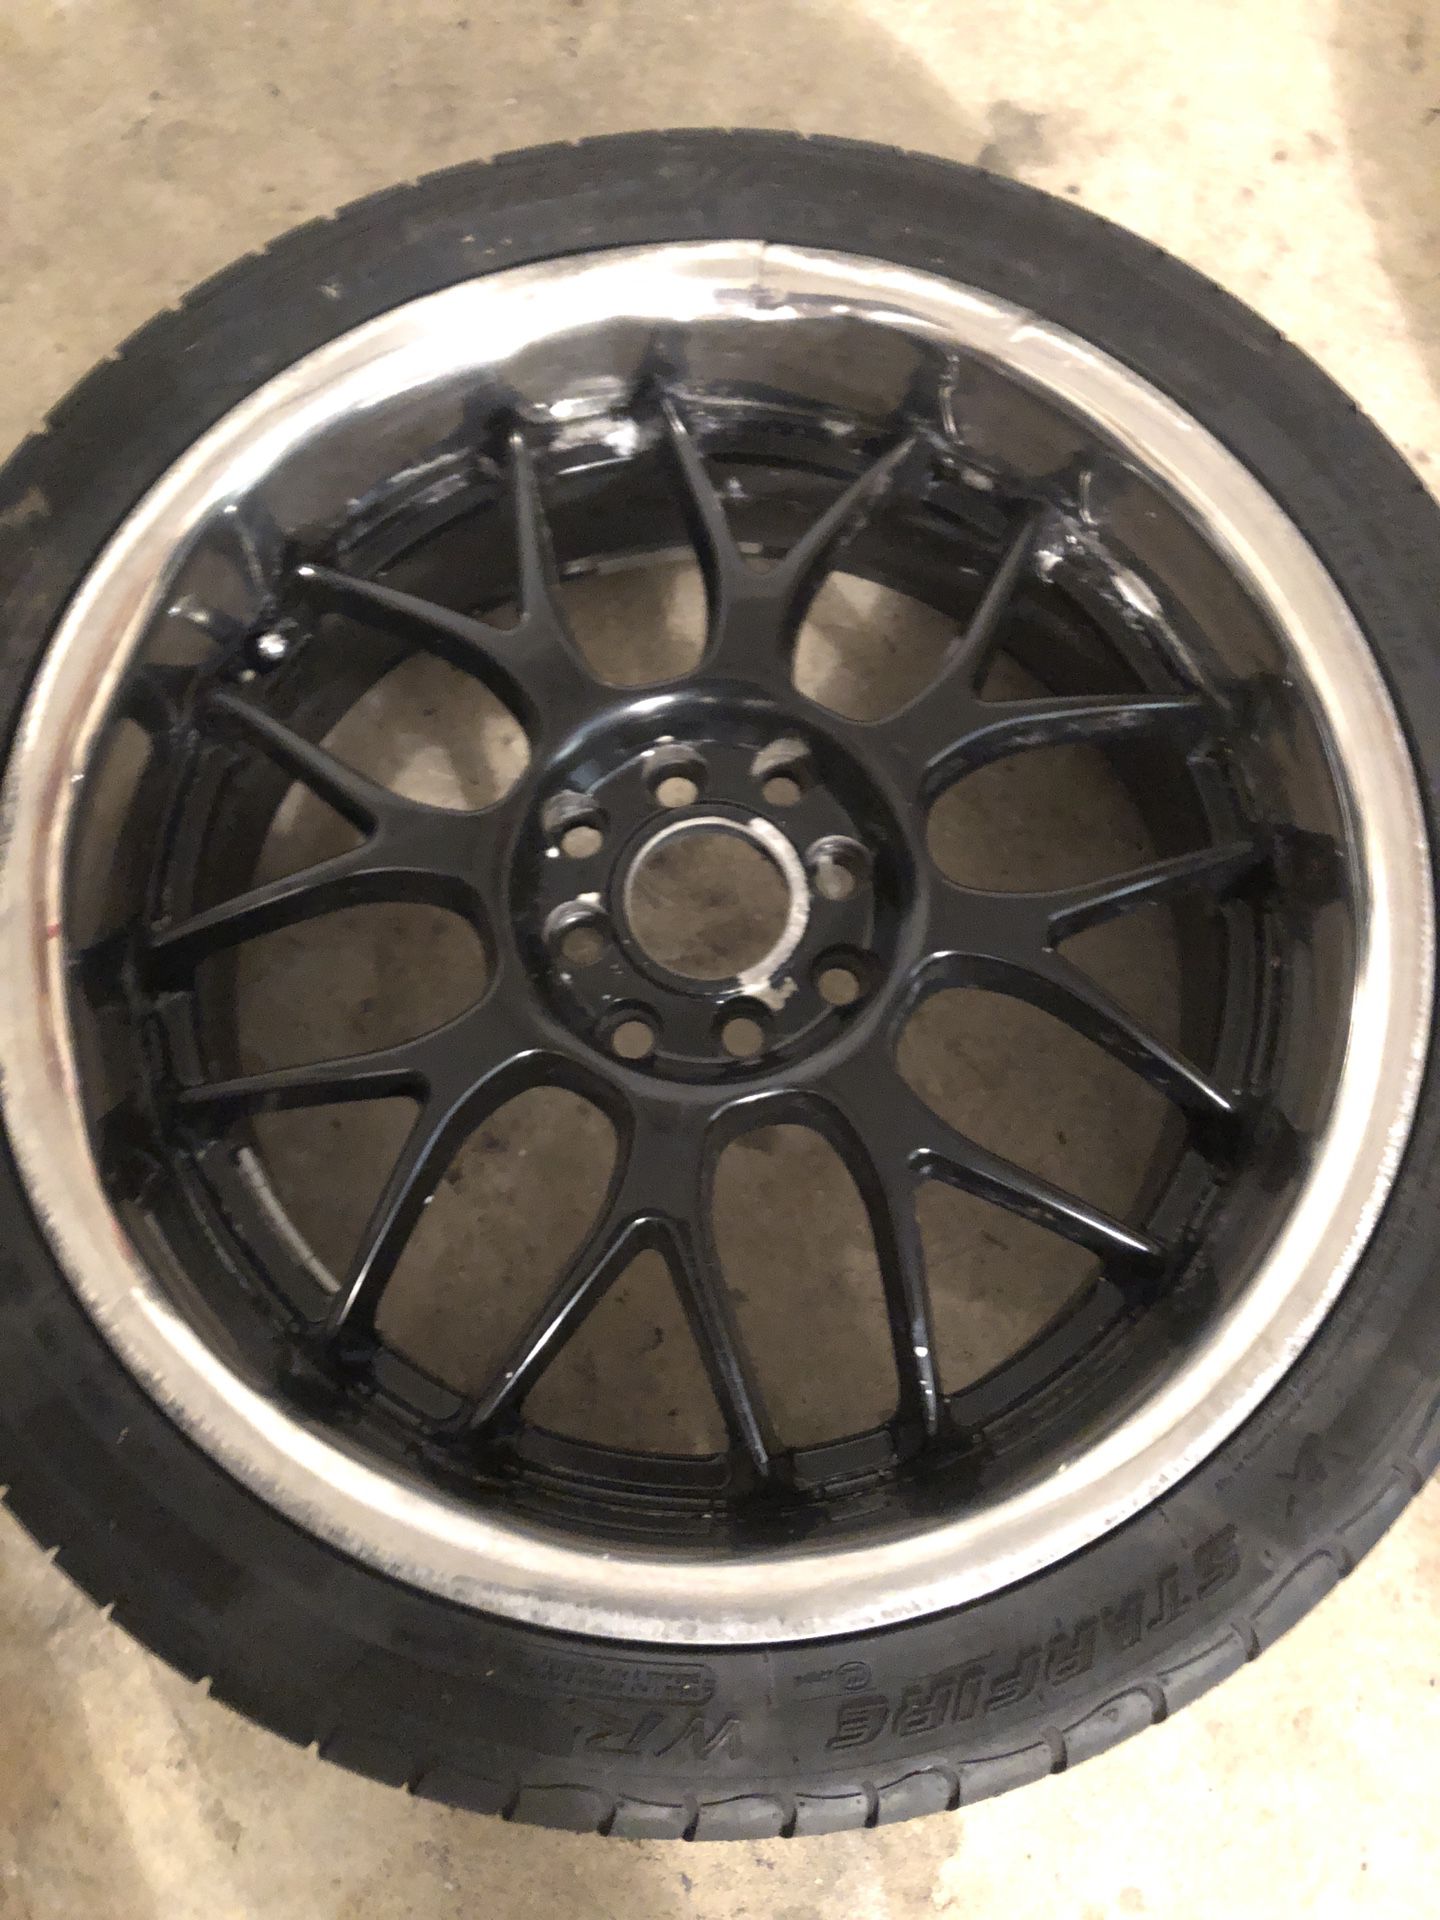 Wheels size 24 inches